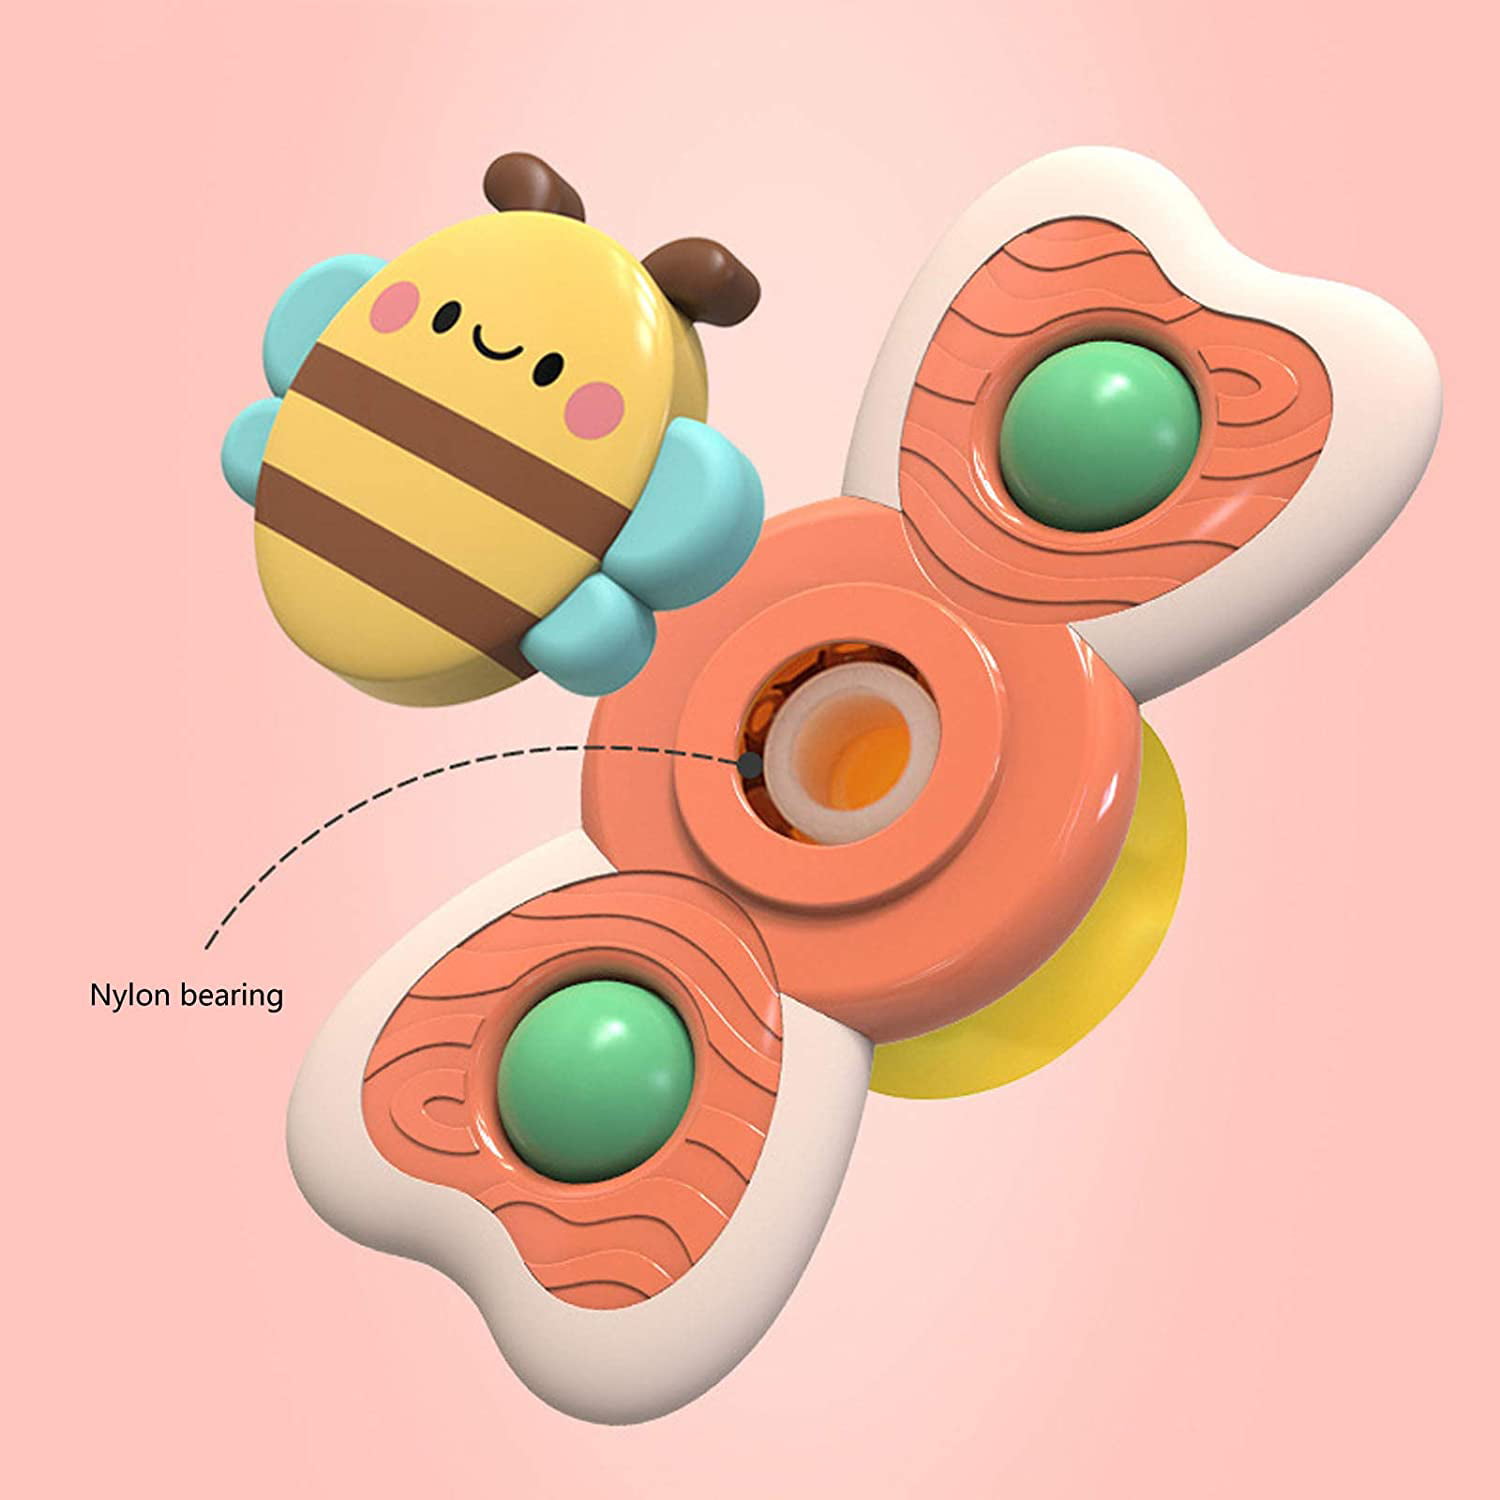 3pcs-Butterfly Ladybug bee Abendedian Baby Child Bath Suction Cup Spinning Tops Toy Animal Turntable Spinning Windmill Stress Relief Frisbee Creative Educational Toys 